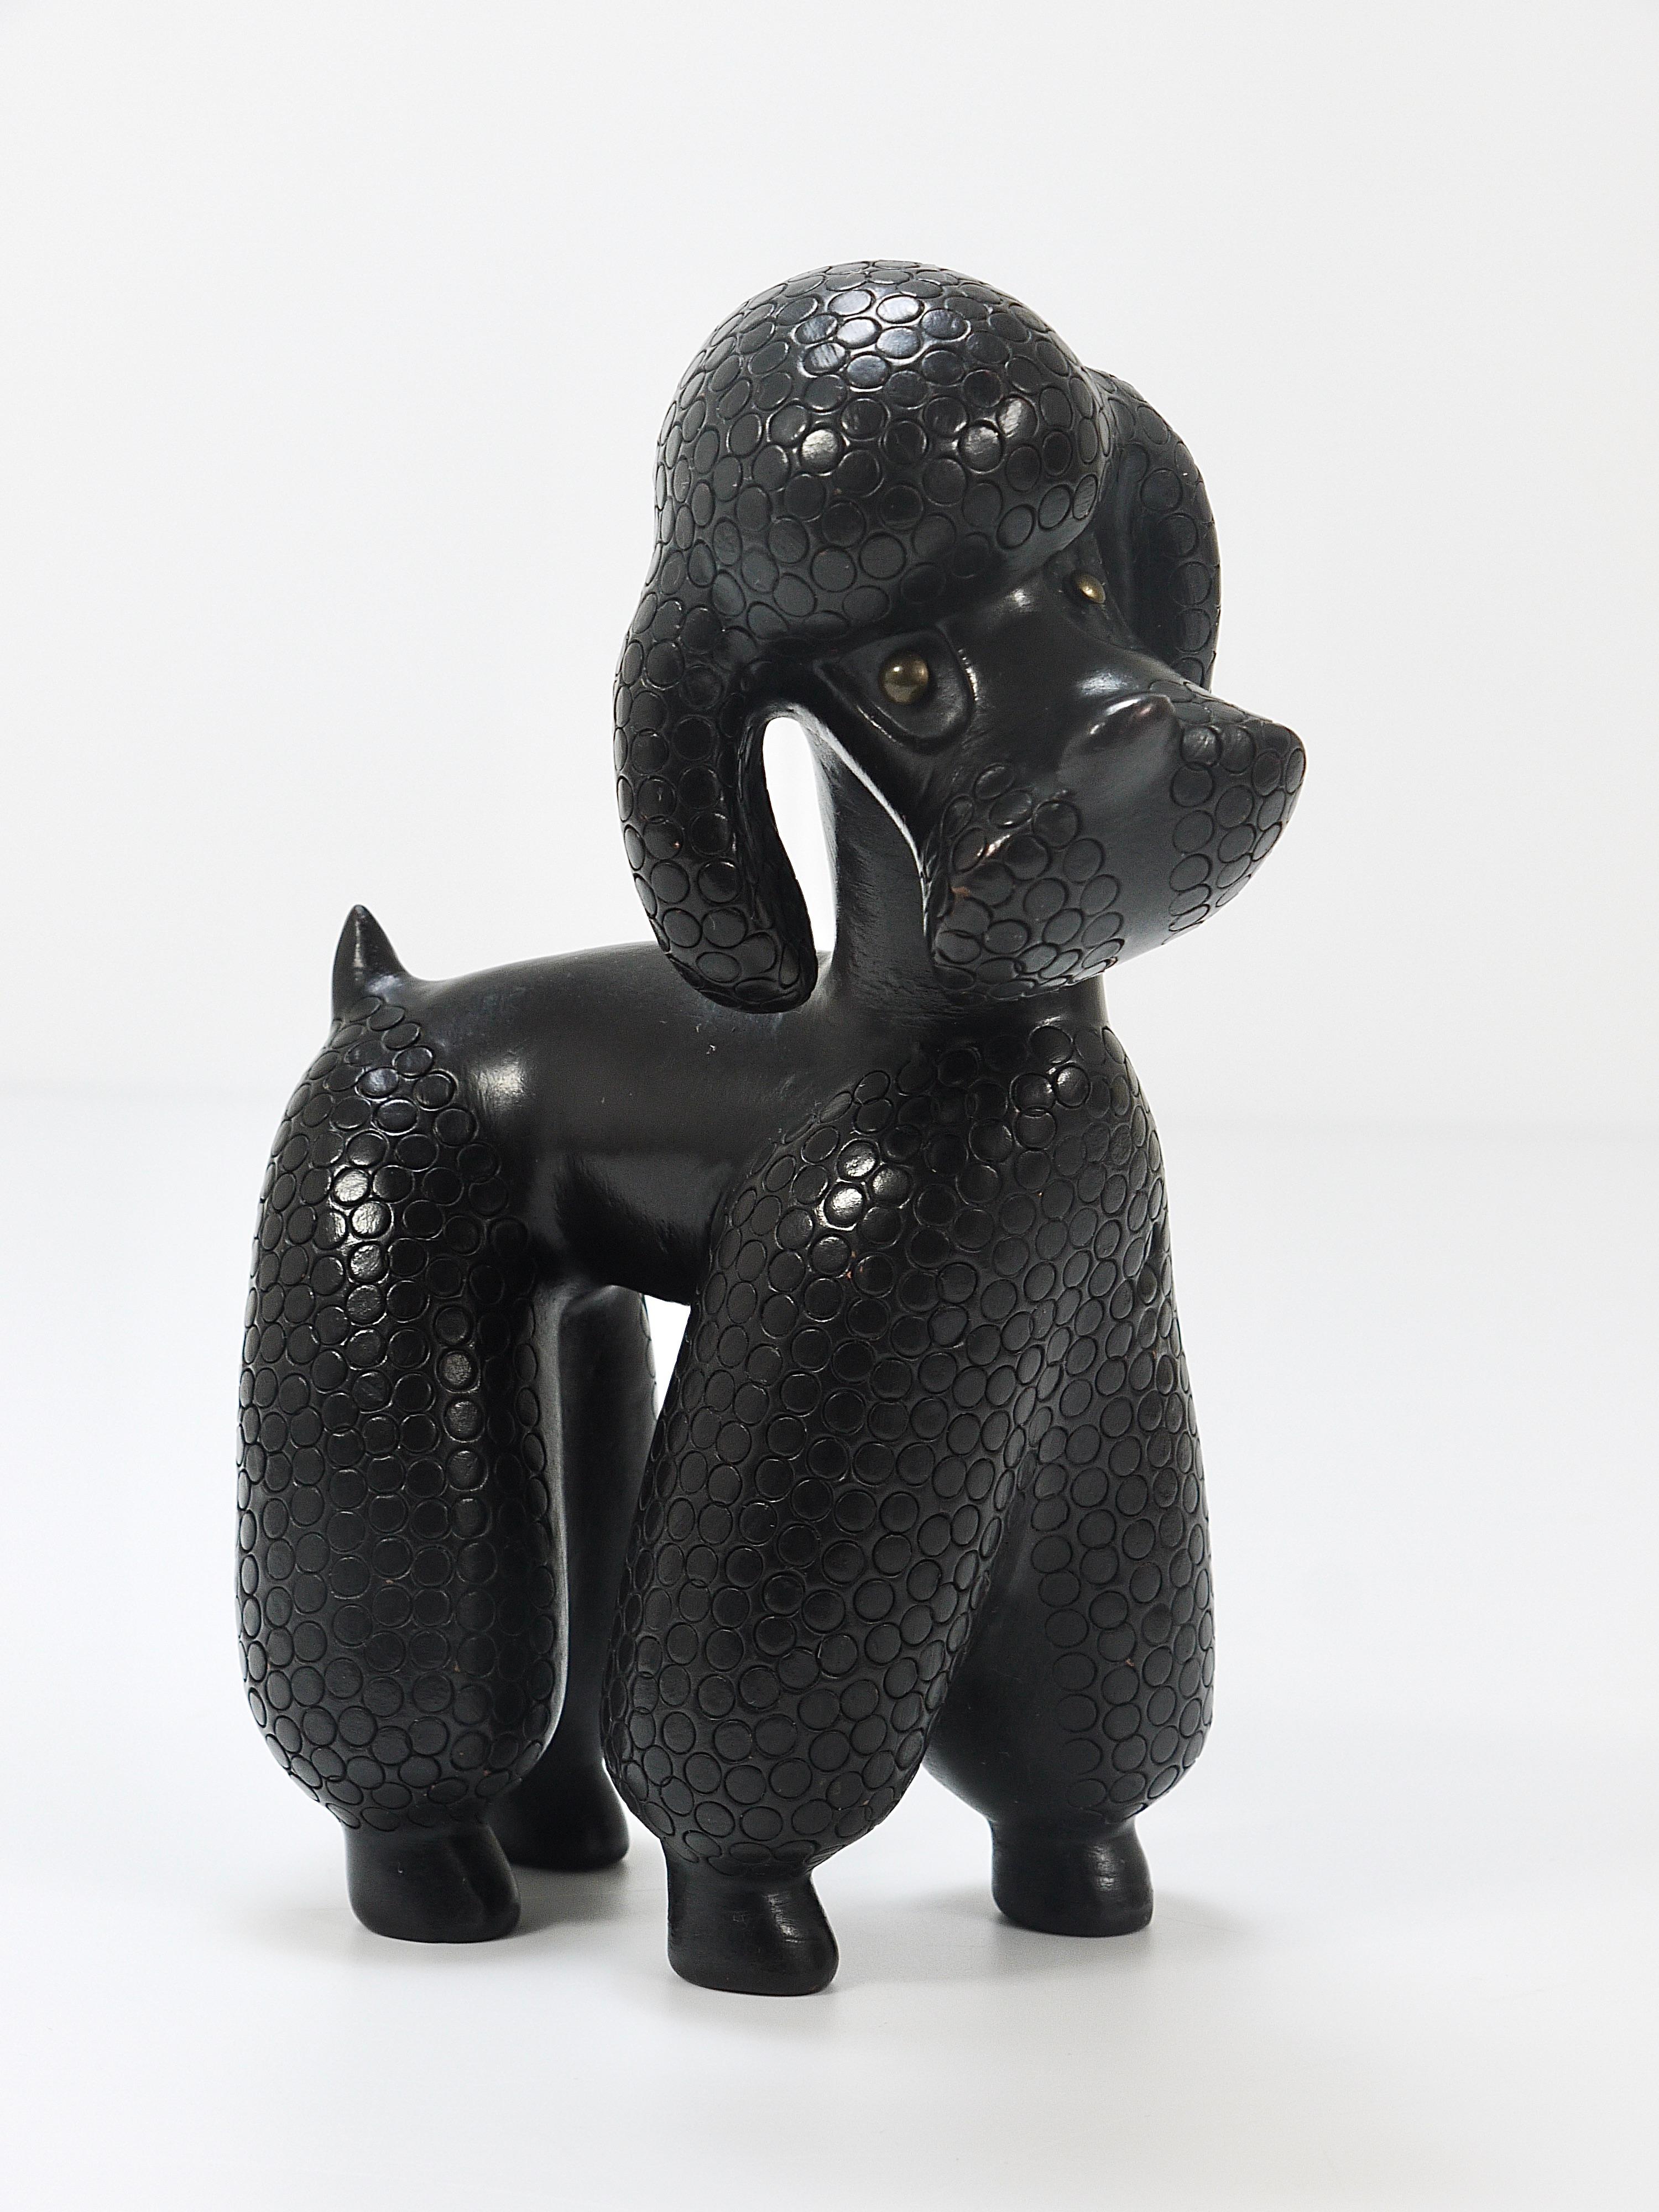 Brass Charming Dog Poodle Sculpture Figurine by Leopold Anzengruber, Austria, 1950s